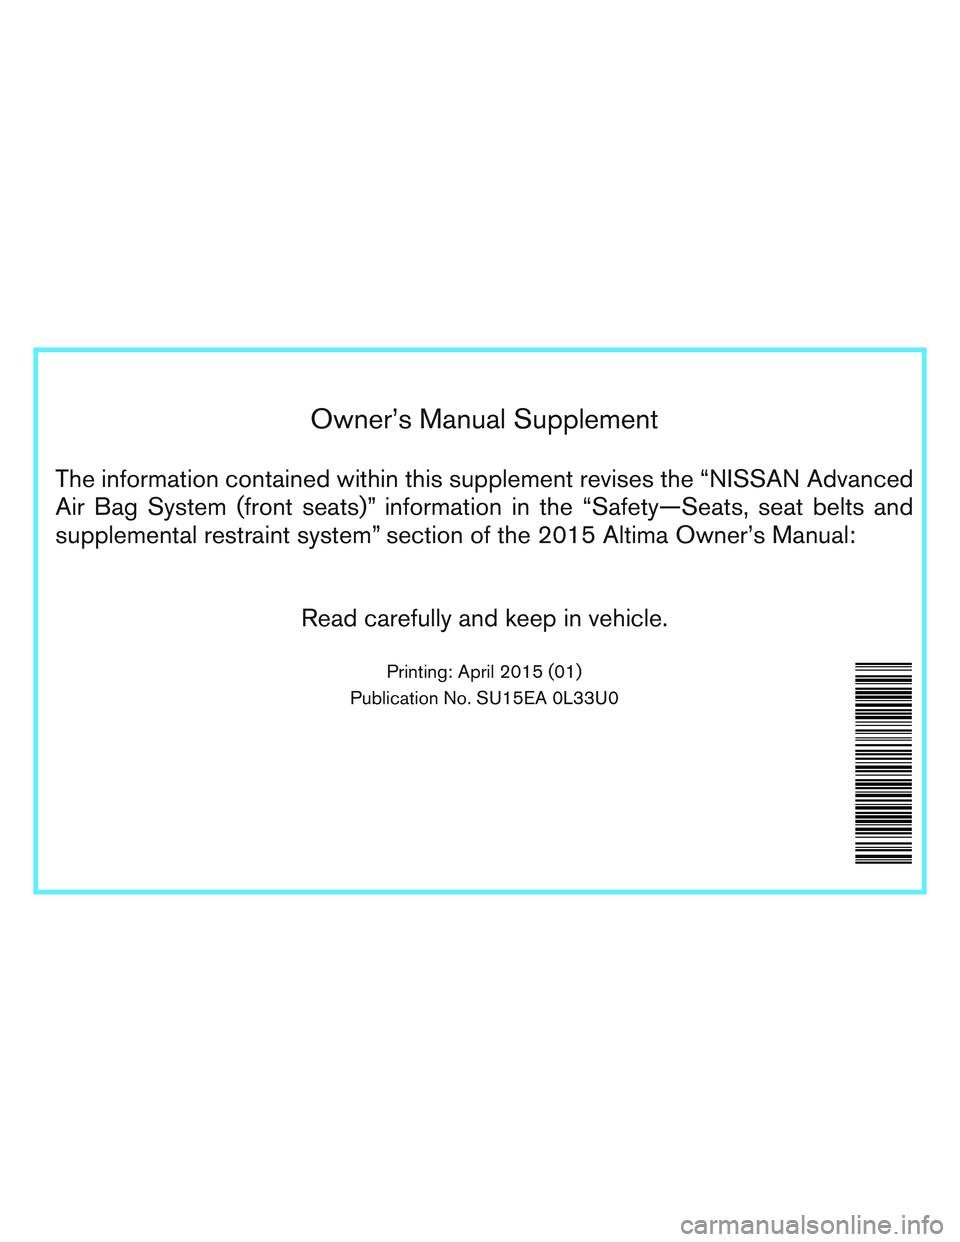 NISSAN ALTIMA SEDAN 2015  Owners Manual Owner’s Manual Supplement
The information contained within this supplement revises the “NISSAN Advanced
Air Bag System (front seats)” information in the “Safety—Seats, seat belts and
supplem